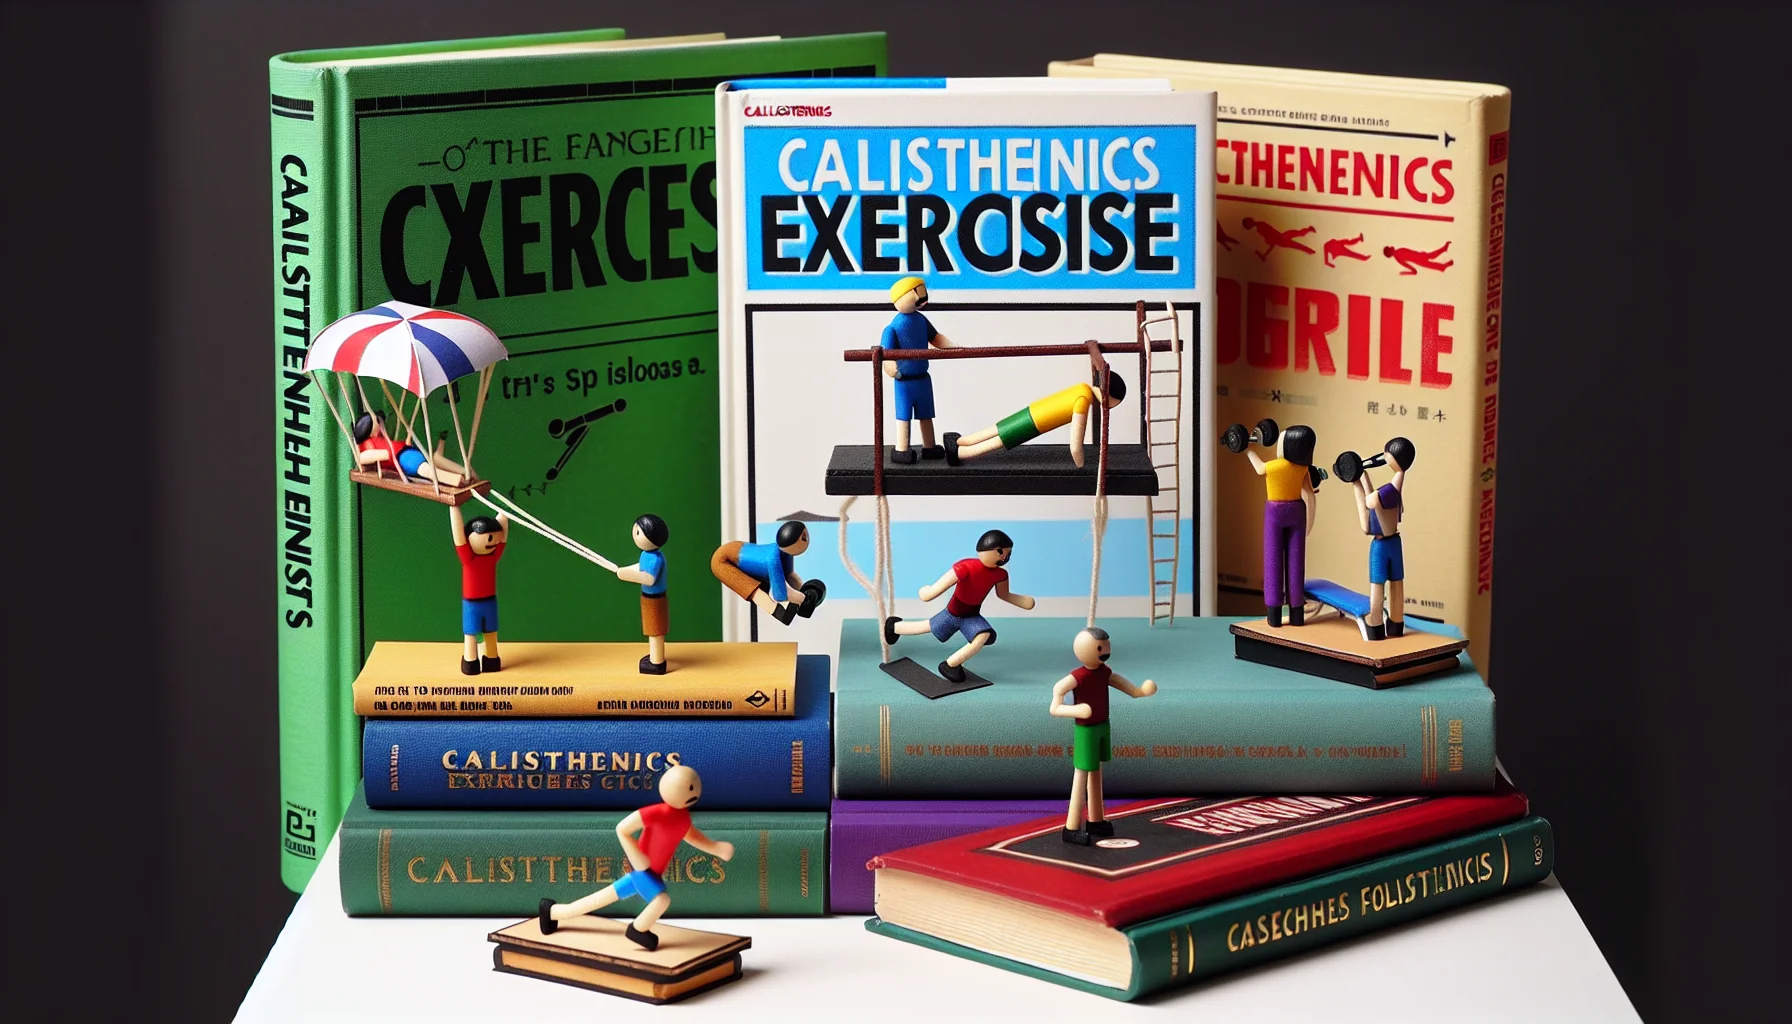 Create a humorous and authentic scenario enticing people to partake in exercise, the centerpiece of which is several calisthenics books. One of the books could be rigged as a mock parachute for a tiny Asian fitness-oriented action figure, bracing itself for an epic leap from the highest shelf. Another could serve as a plank for a determined Caucasian paper-chain character attempting push-ups. A third book could be twisted into an imaginary treadmill where a Hispanic mini-toy is intensely jogging. The scenario should evoke a playful and positive vibe, making the prospect of exercising engaging and interesting.